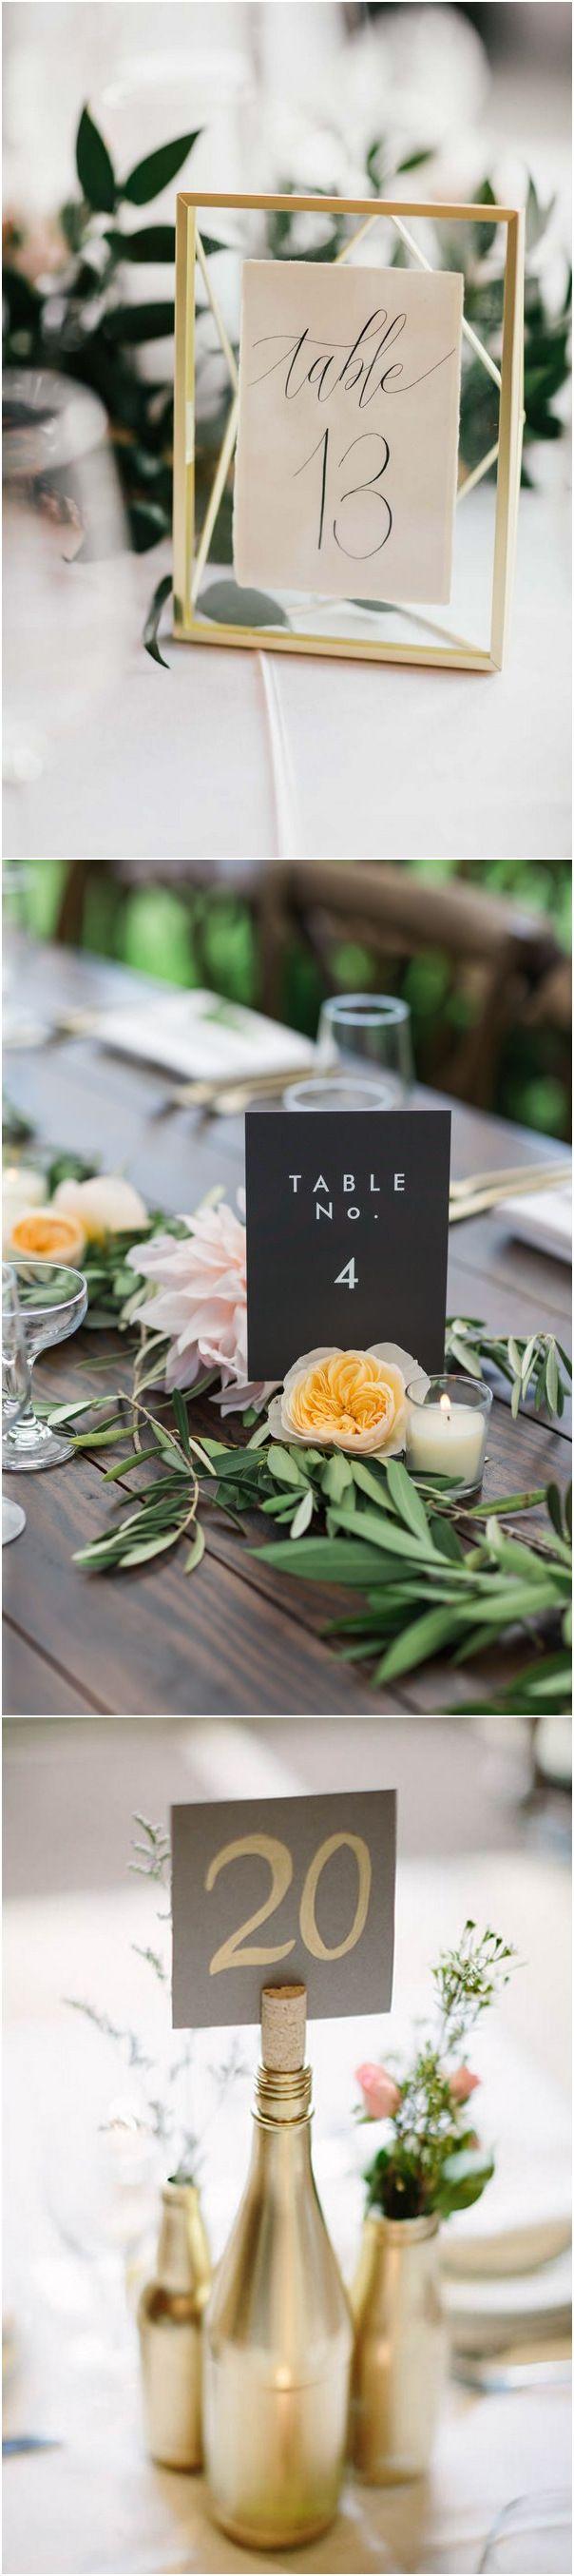 Mariage - 18 Inspiring Wedding Table Number Ideas To Love - Page 3 Of 3